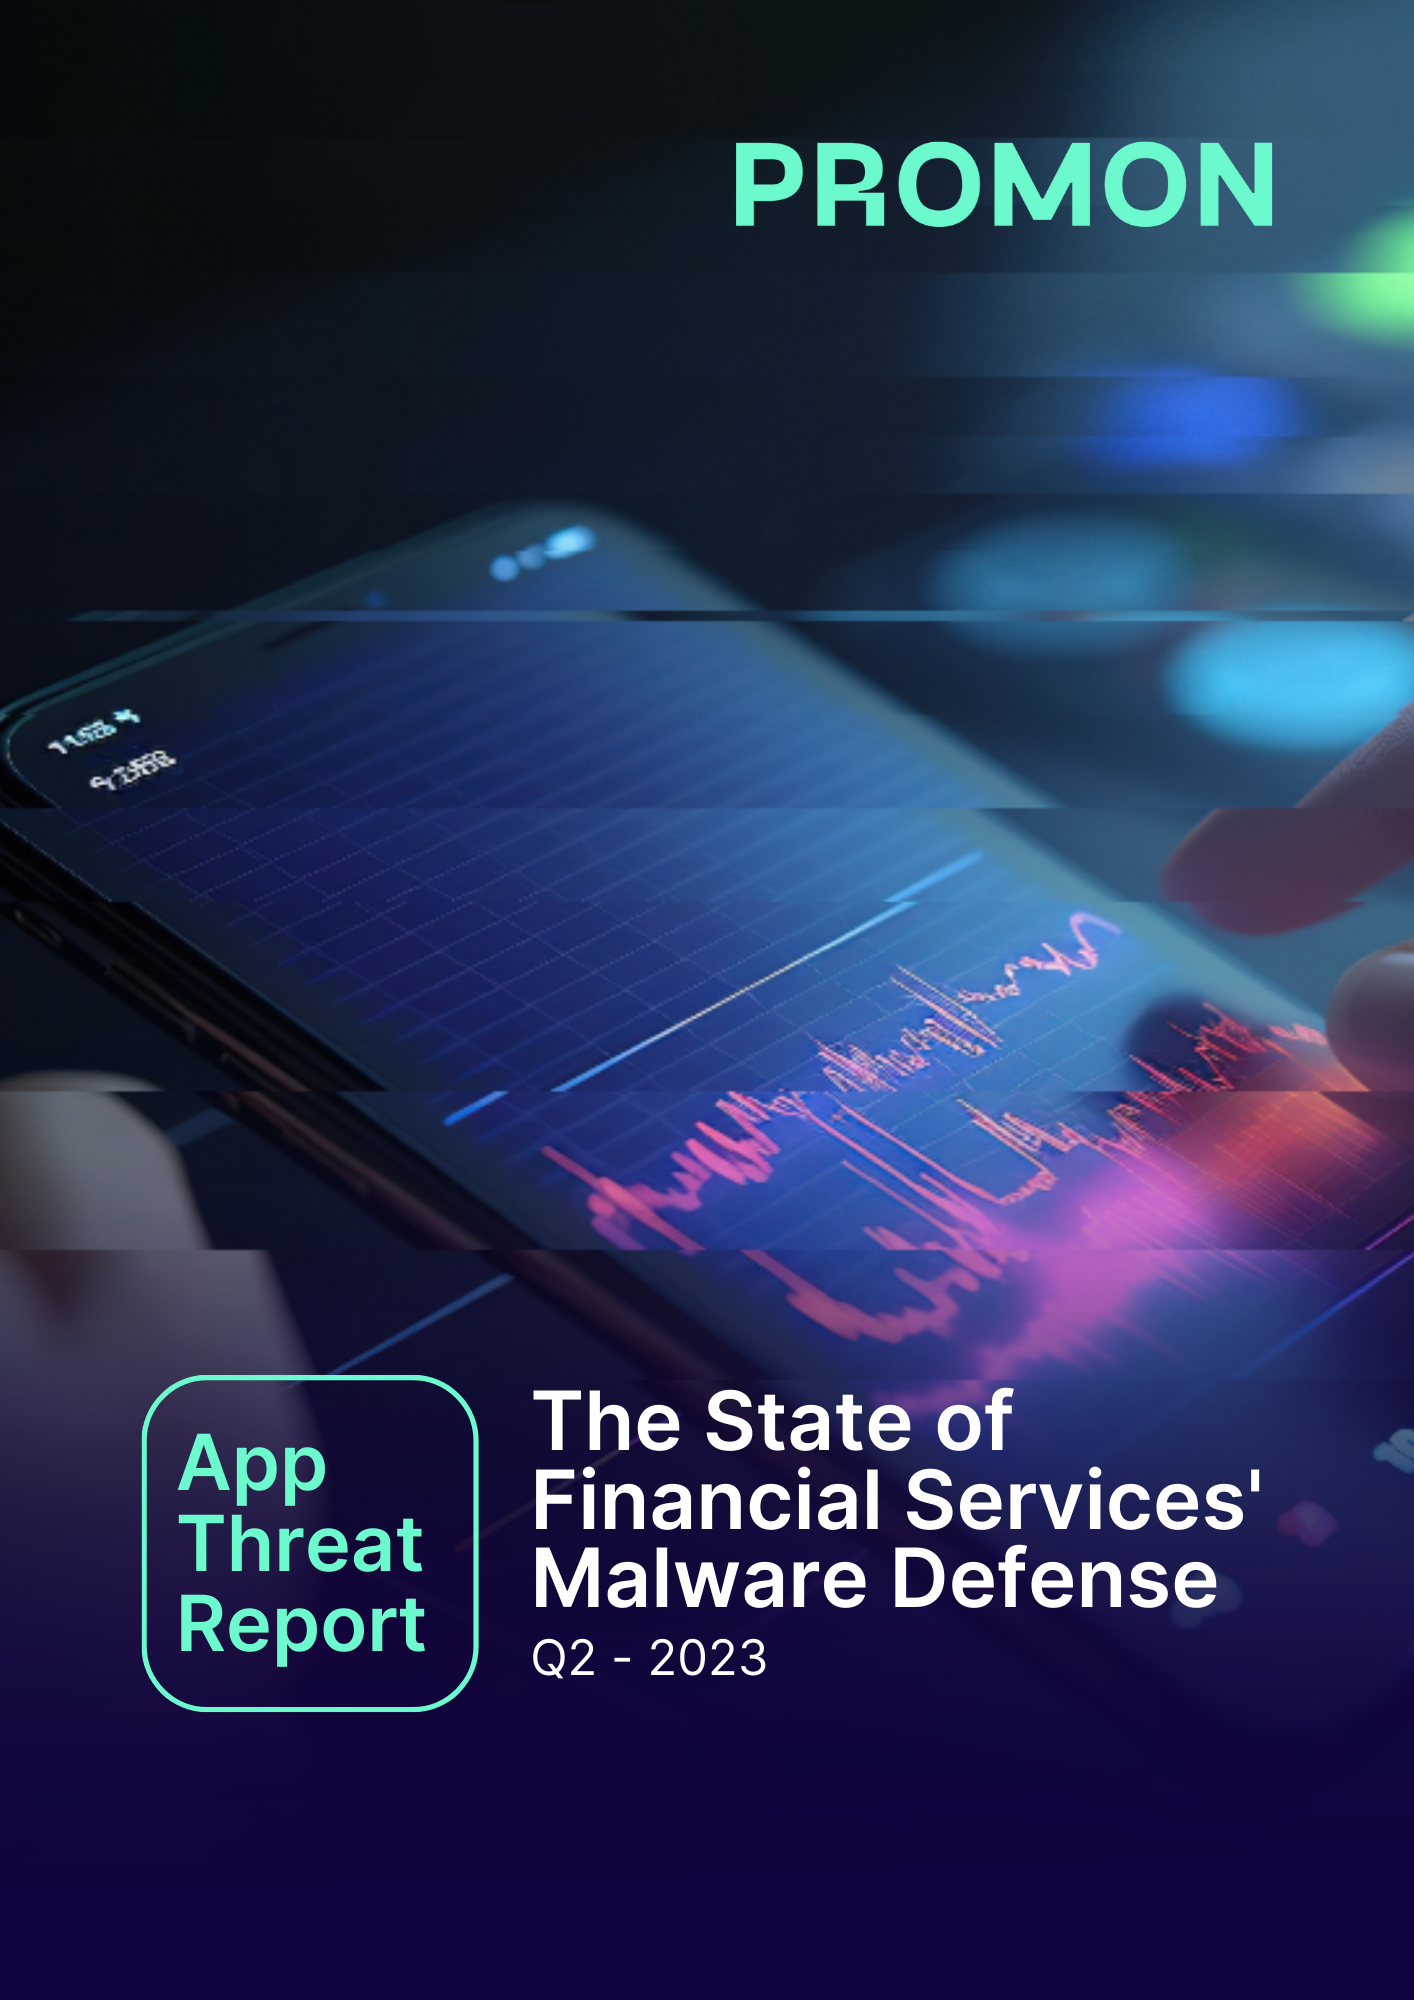 The State of Financial Services’ Malware Defense